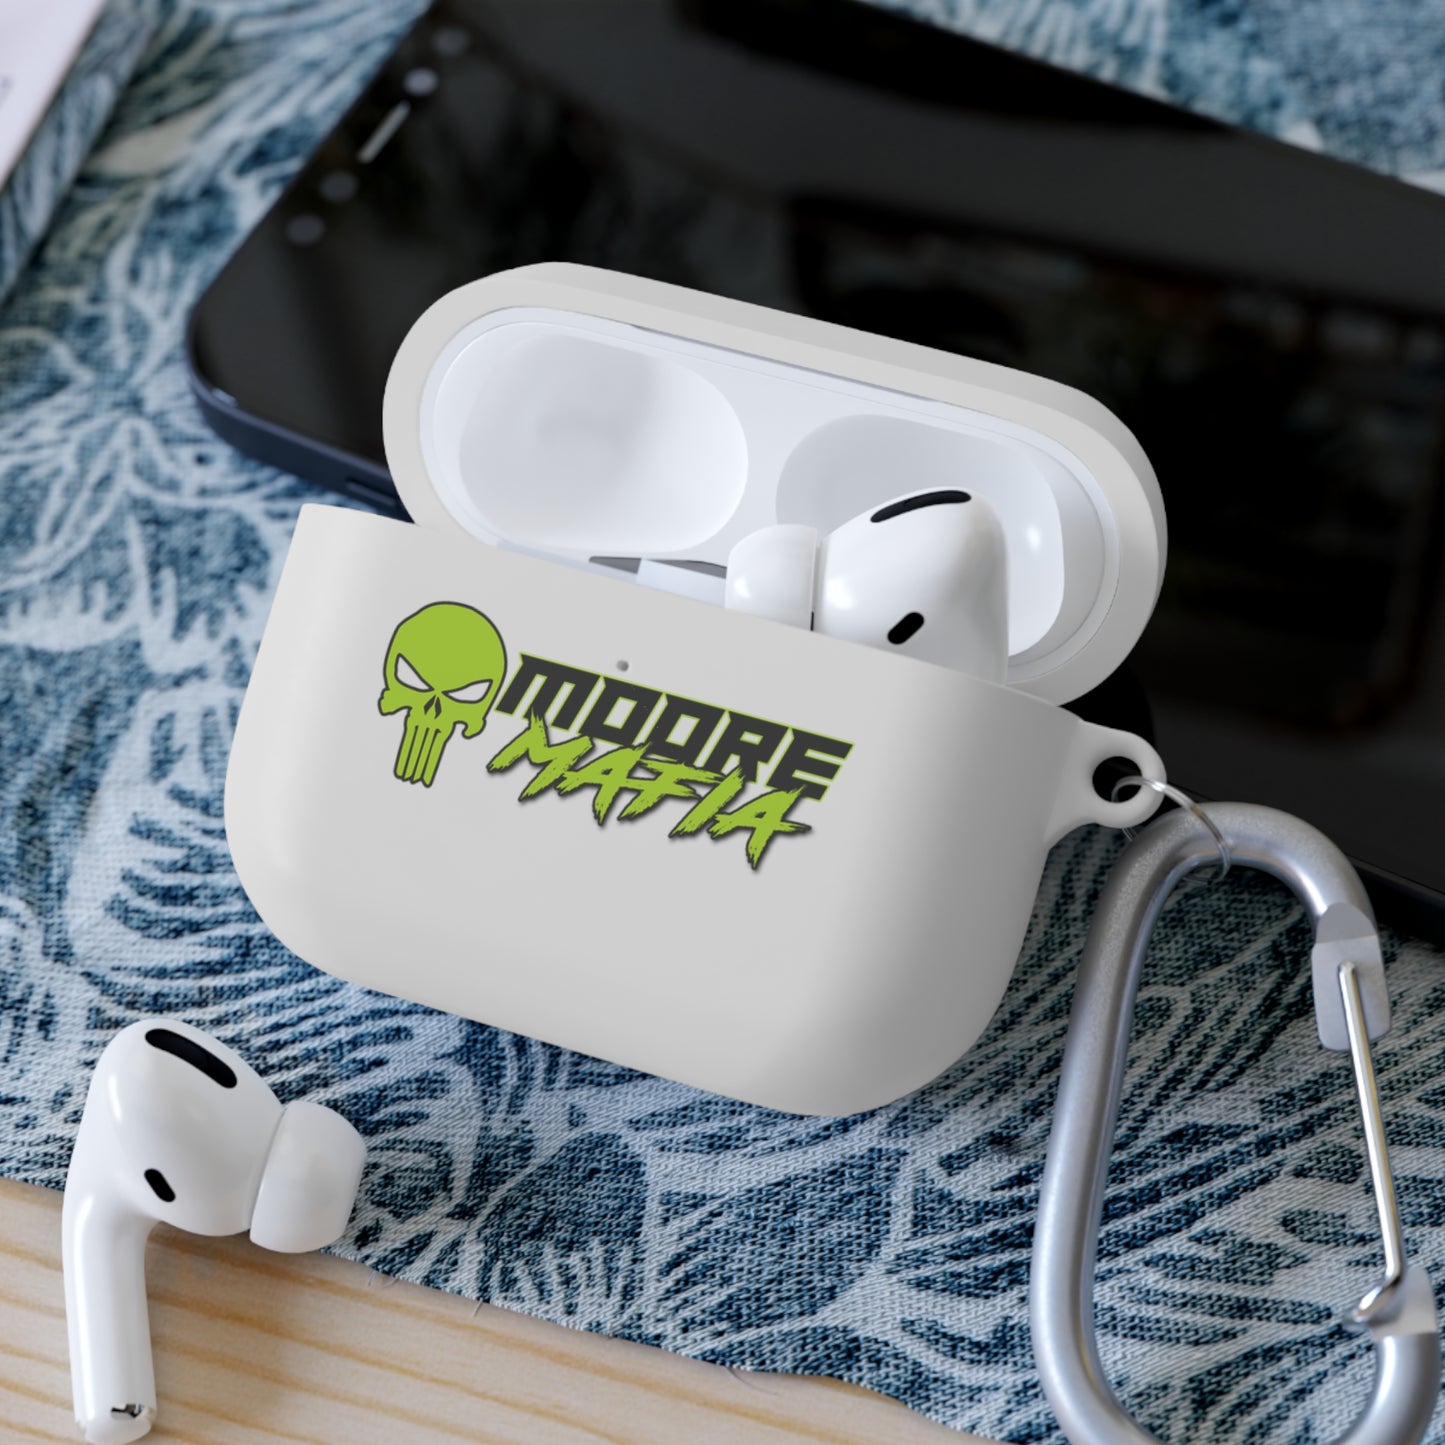 Moore Mafia AirPods and AirPods Pro Case Cover